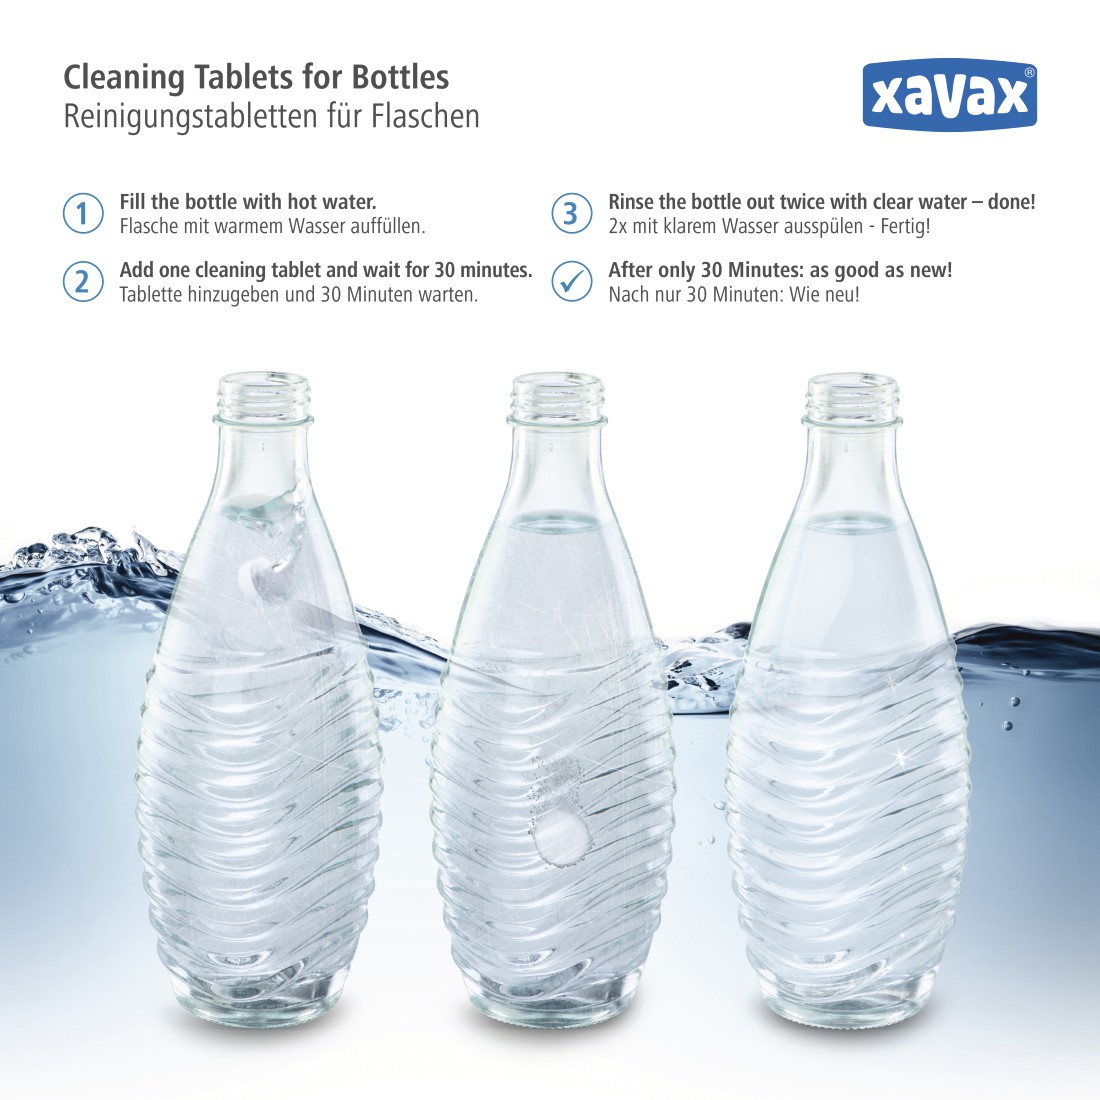 awx4 High-Res Appliance 4 - Xavax, Cleaning Tablets for Bottles, 30 Packs in Display